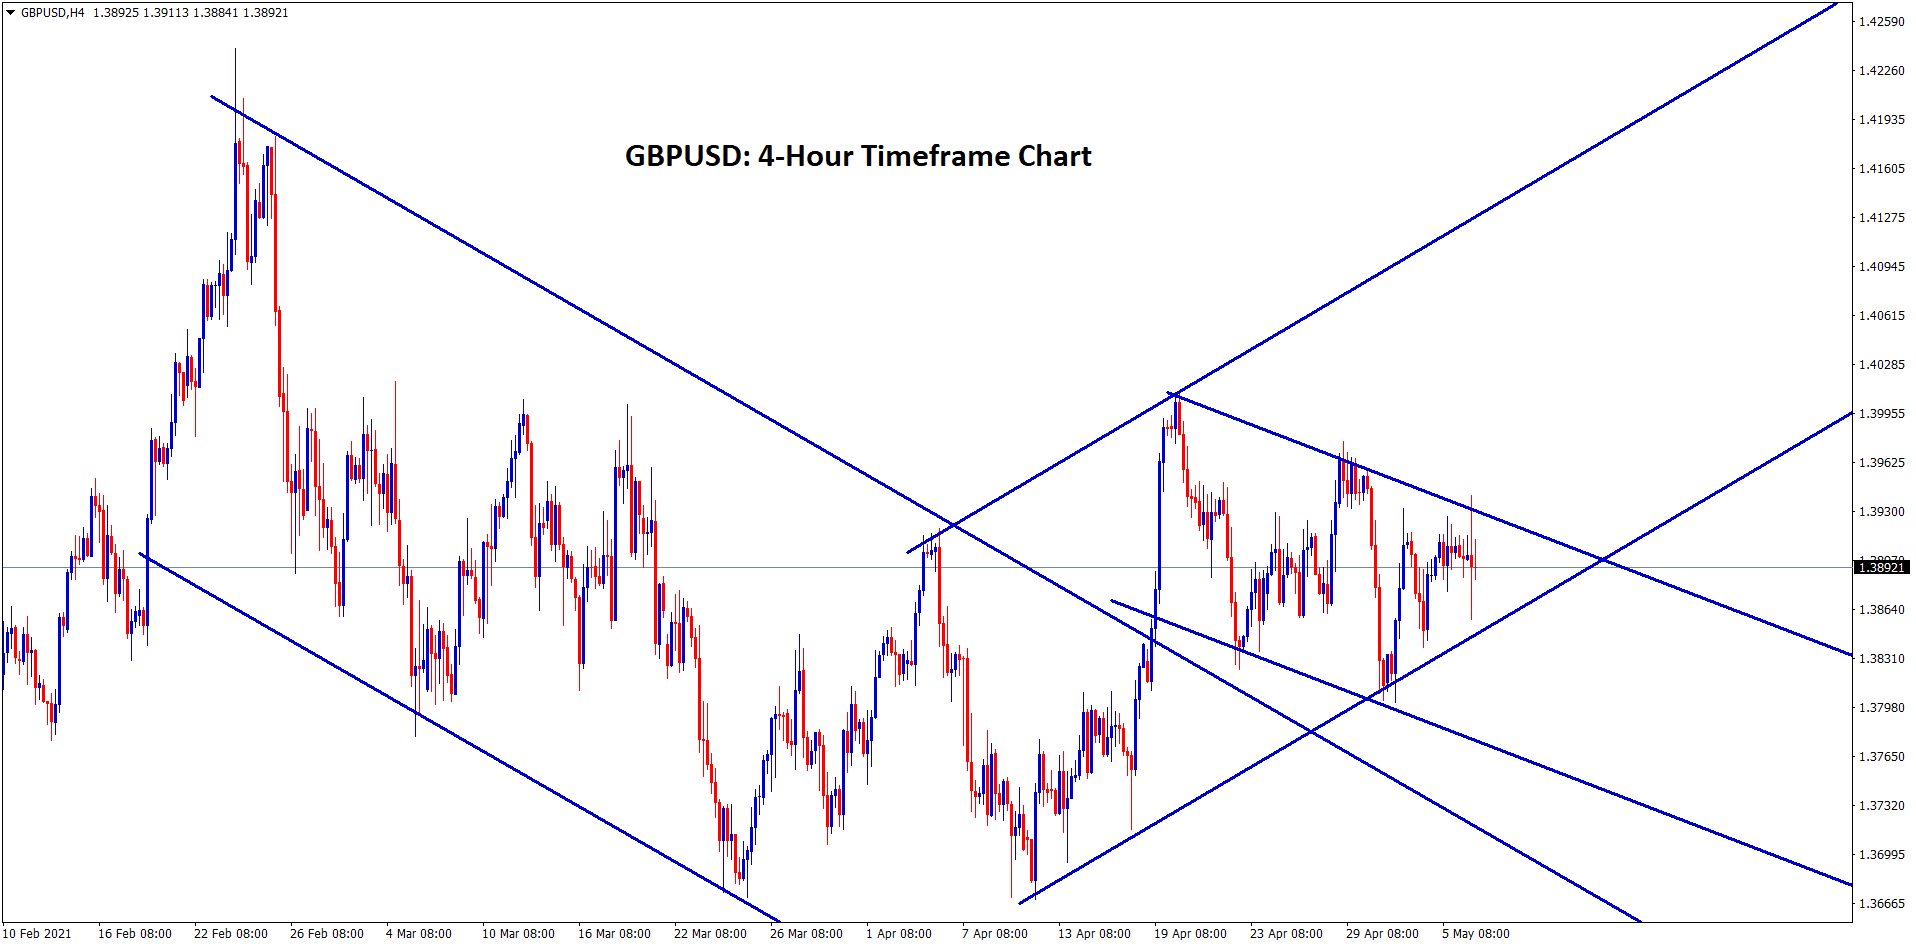 GBPUSD still moving inside the channel ranges